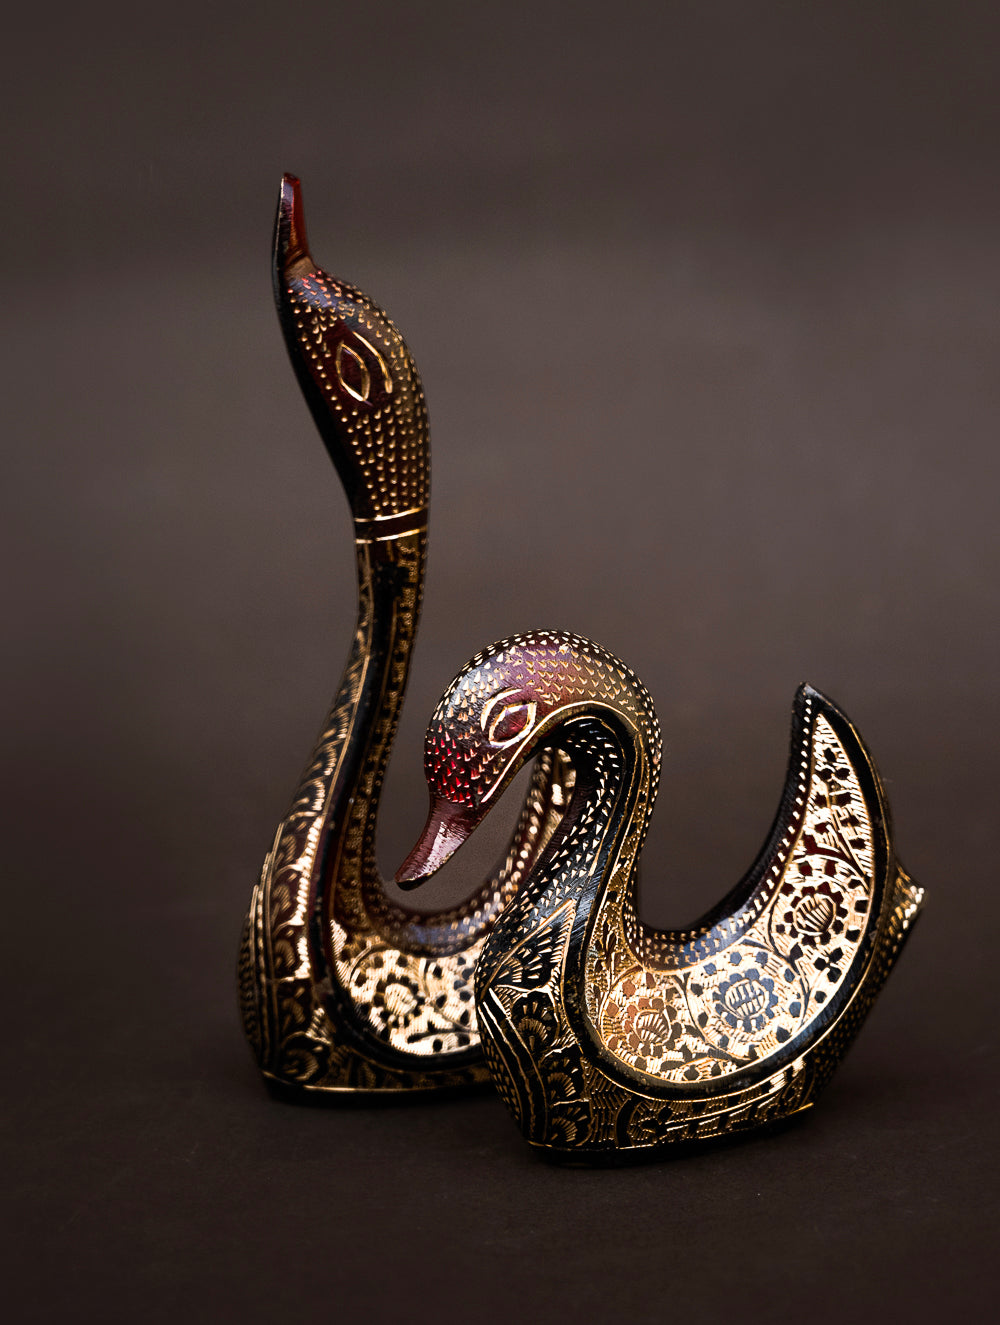 Load image into Gallery viewer, Brass Swan Curio